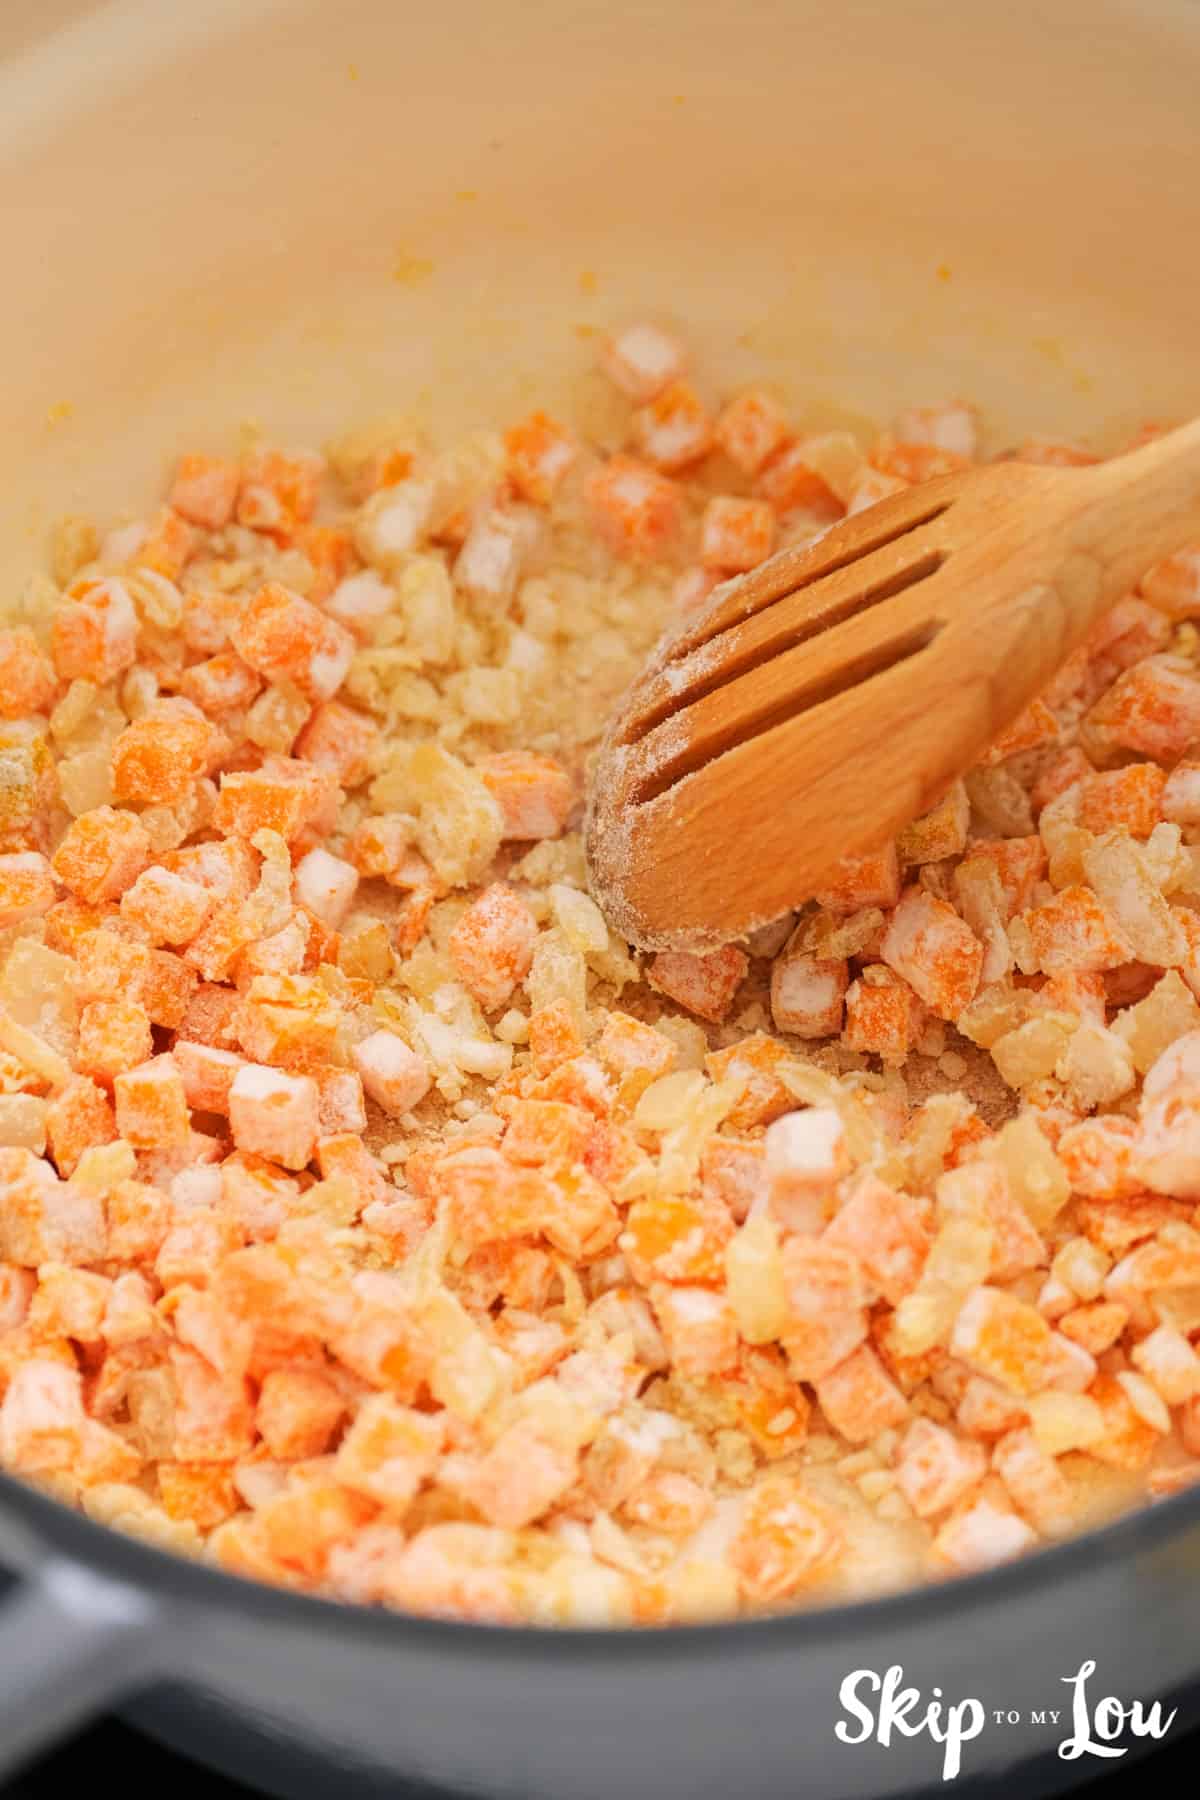 cooking pot with broth, carrots, onions, and flour